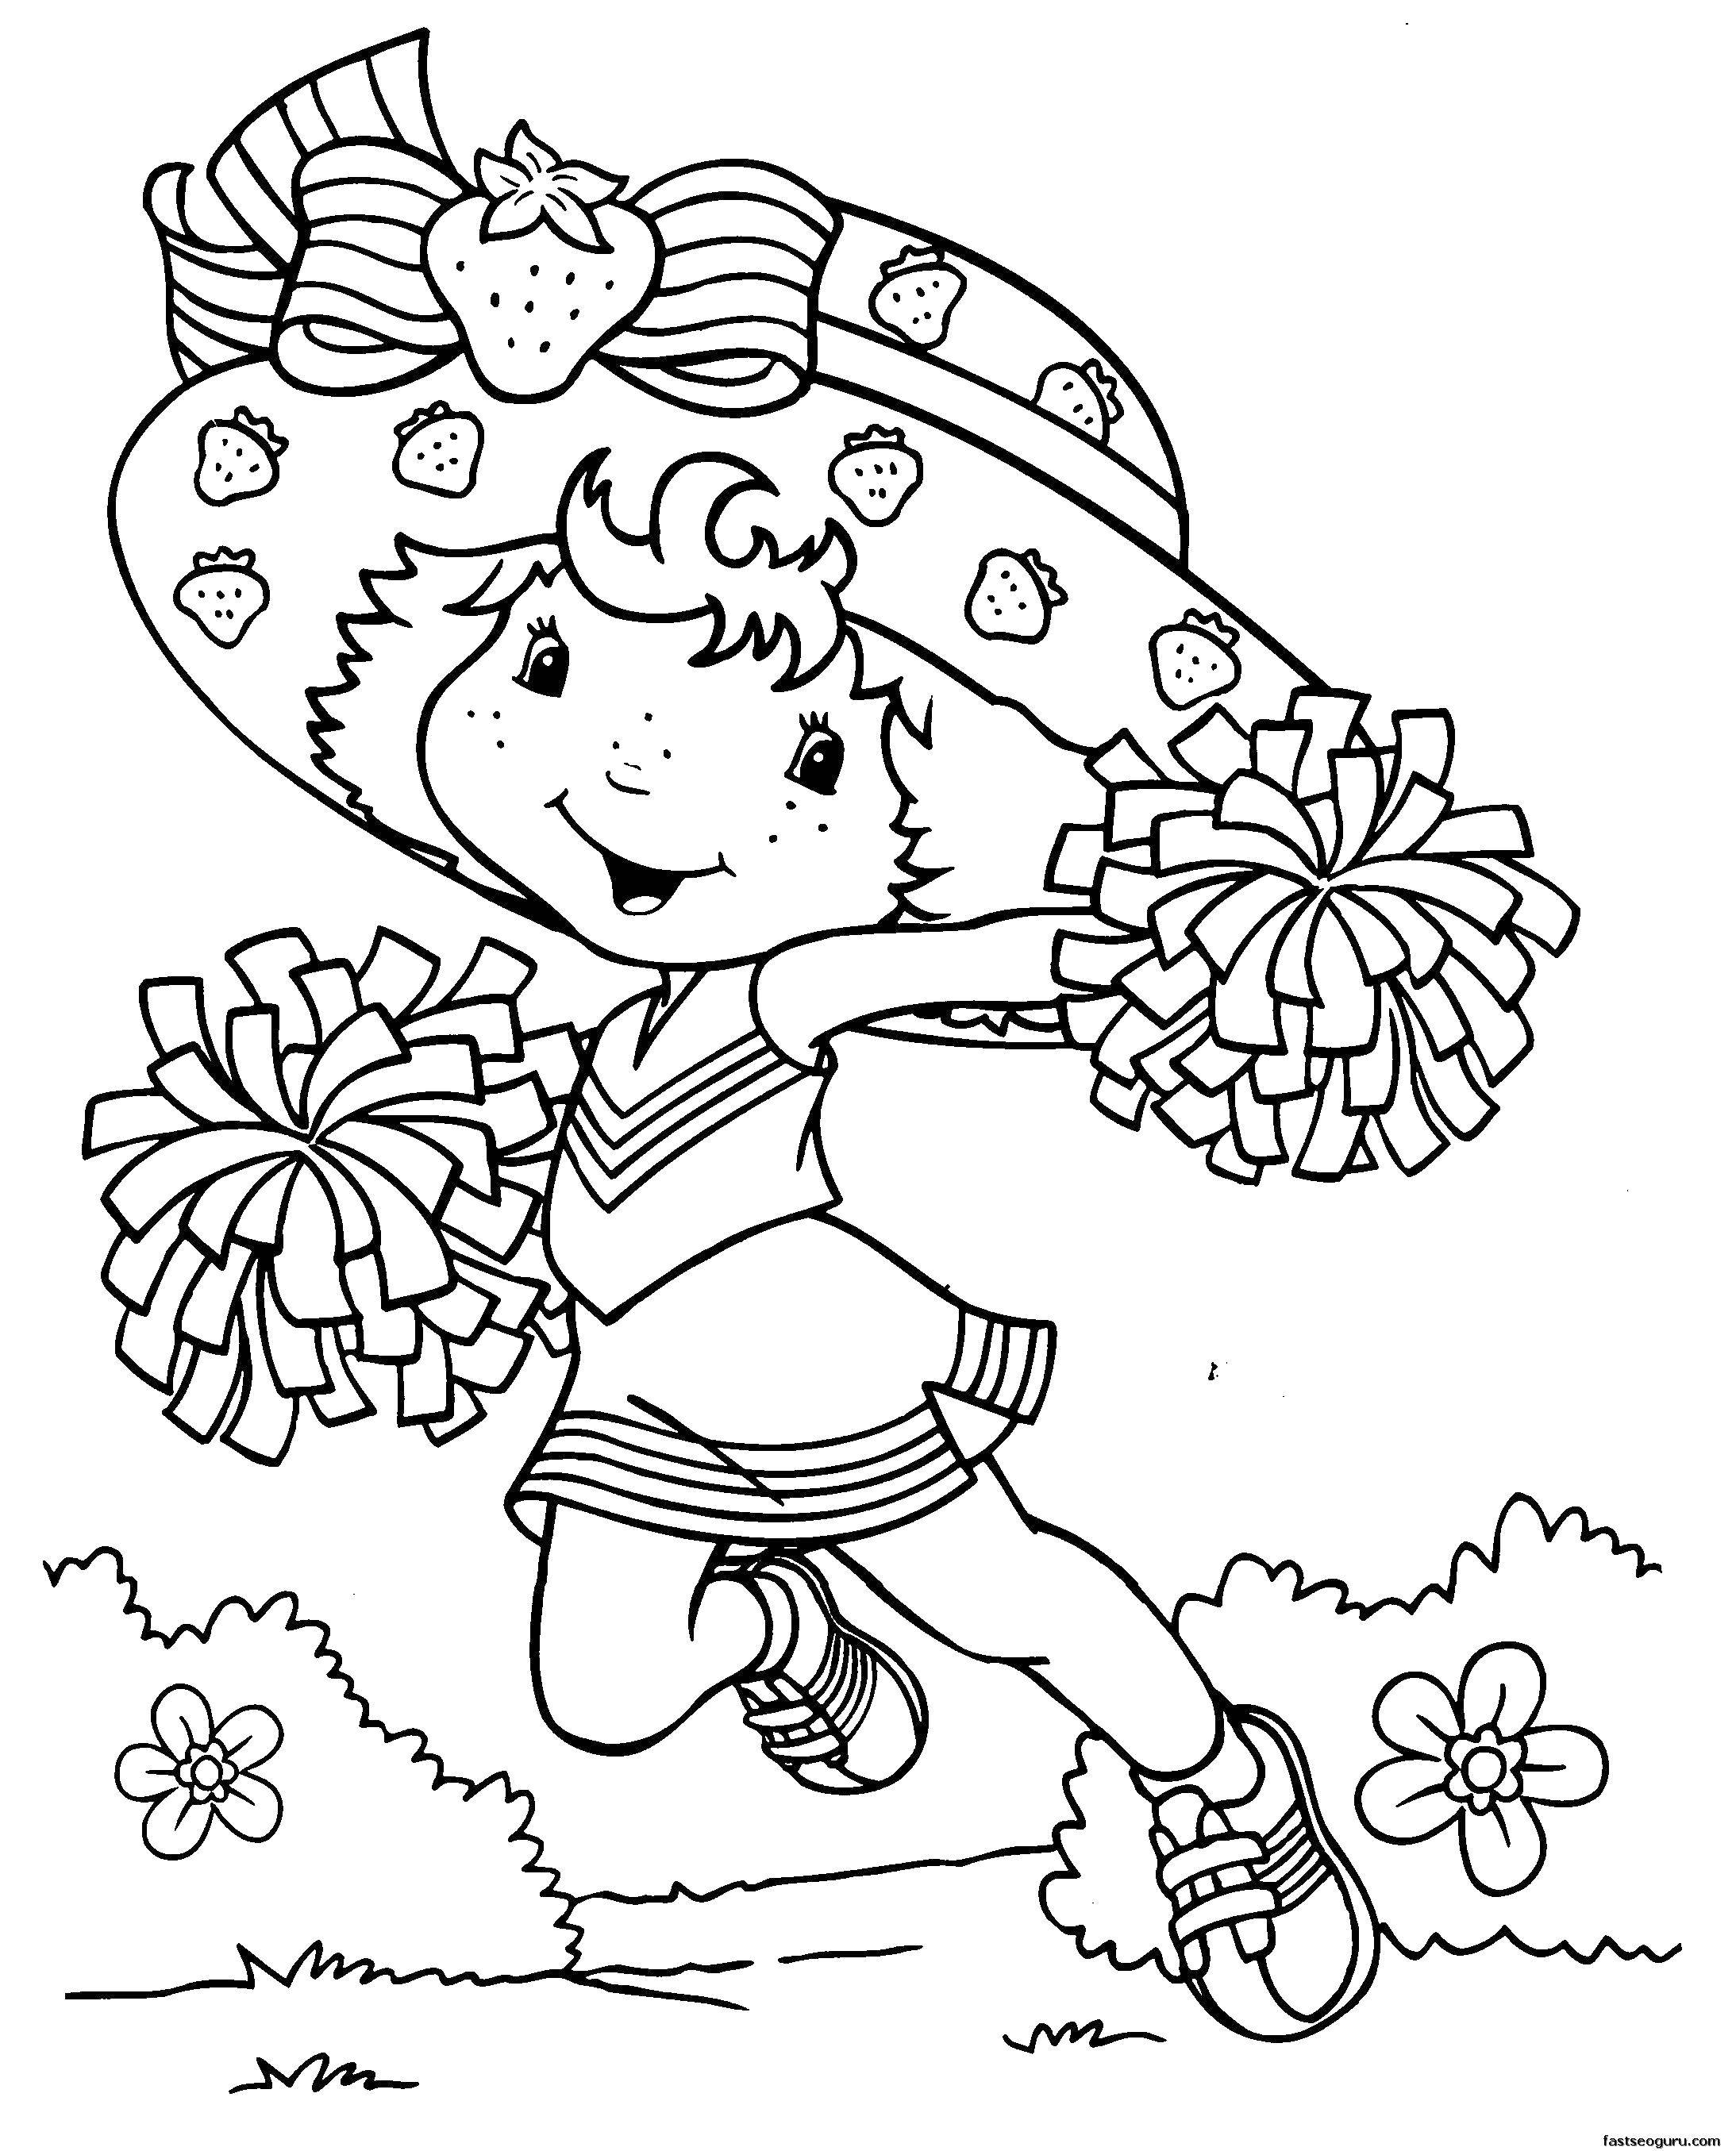 Coloring Strawberry fan. Category For girls. Tags:  strawberry.